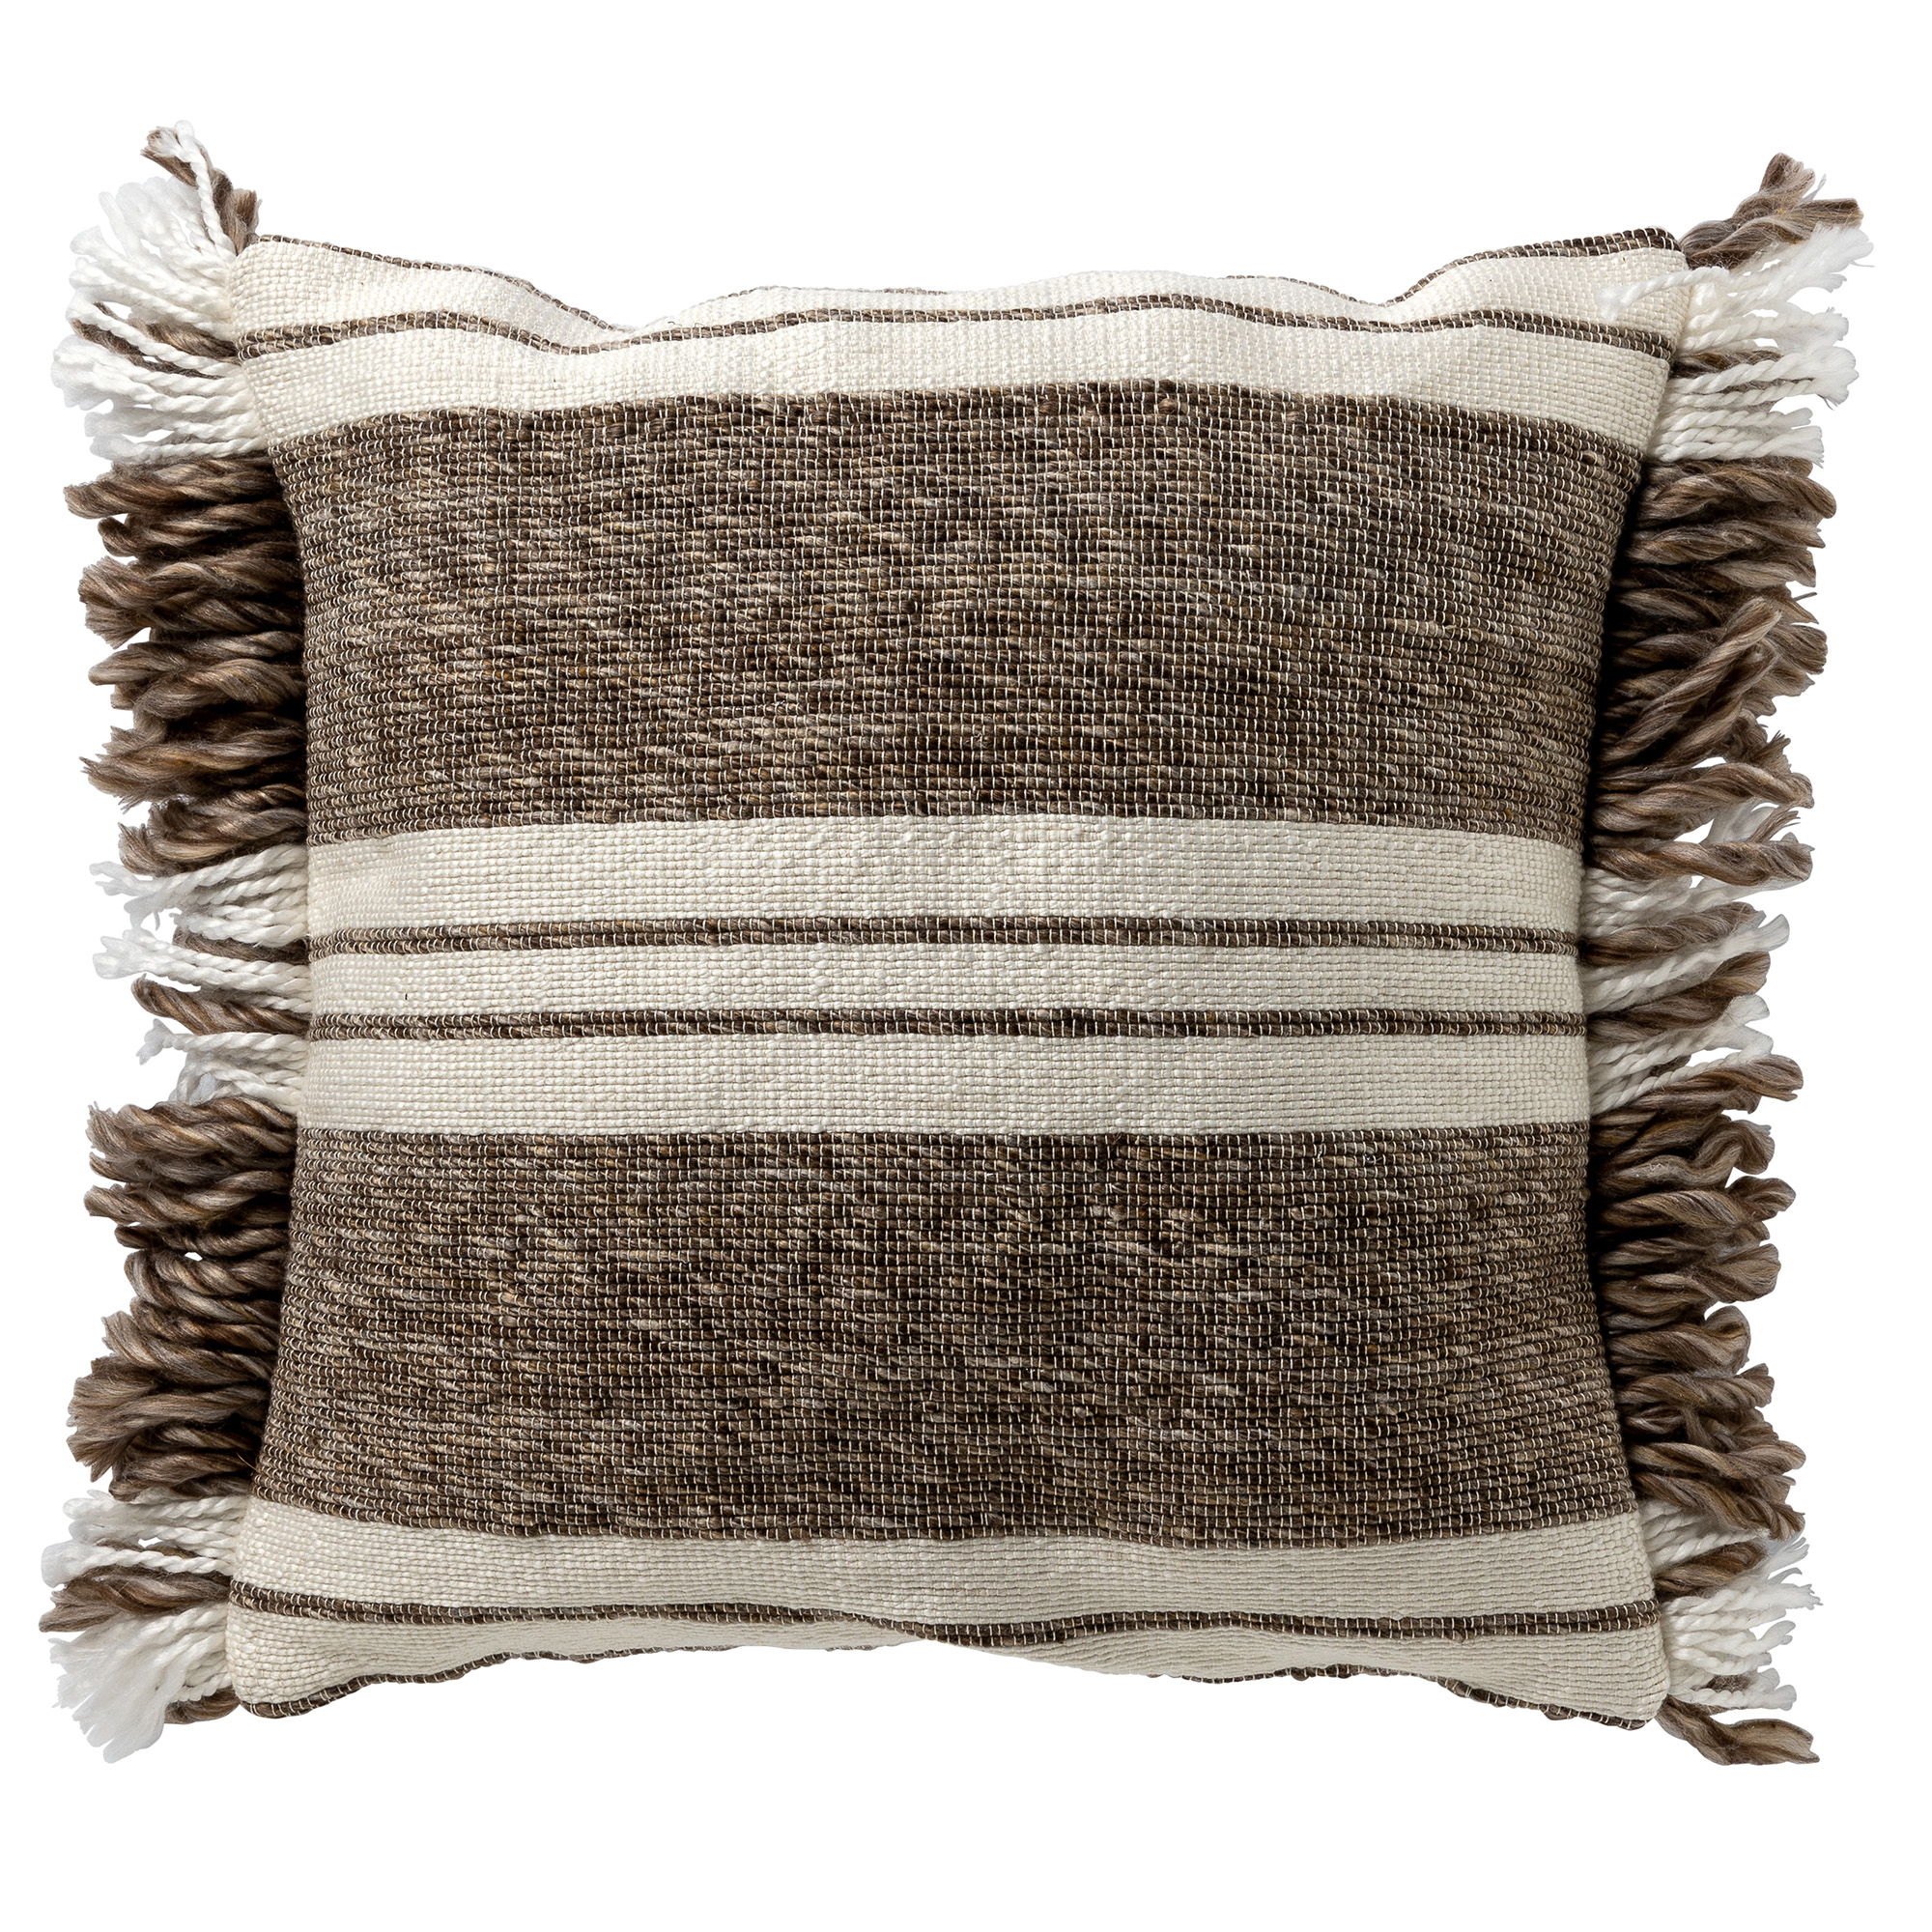 EDGAR - Kussenhoes van 85% gerecycled polyester - streepdessin - Eco Line collectie 45x45 cm - Driftwood - taupe 